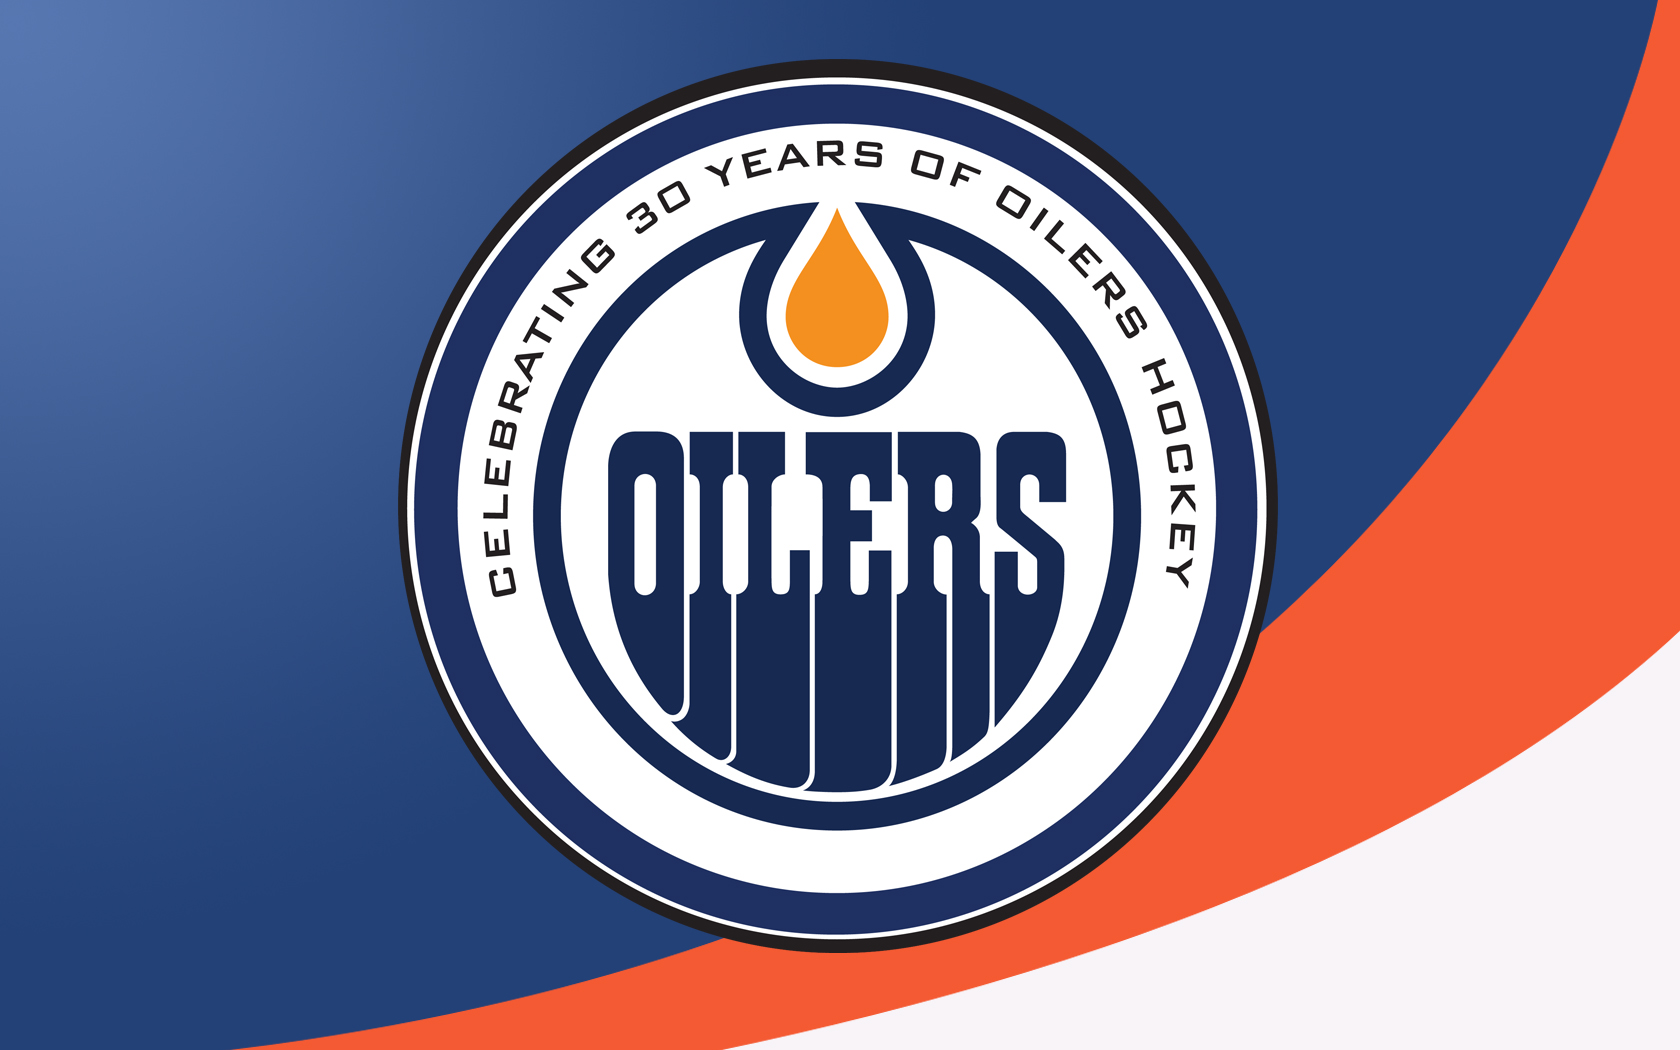 Hey all, I was wondering if anyone here has any Oilers wallpapers to share 